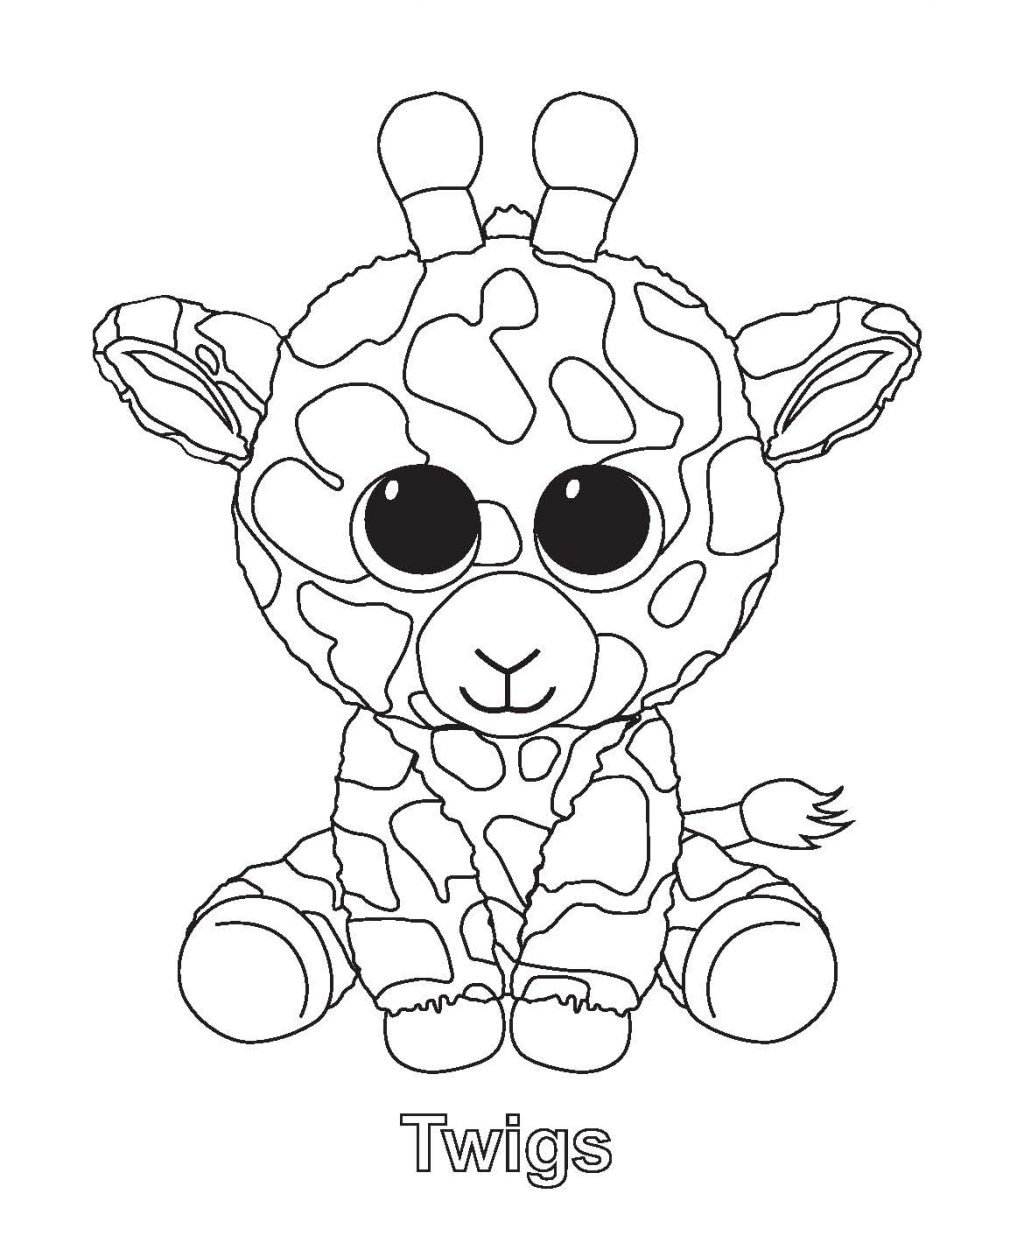 Beanie Boo Coloring Pages - Free Printable Coloring Pages for Kids